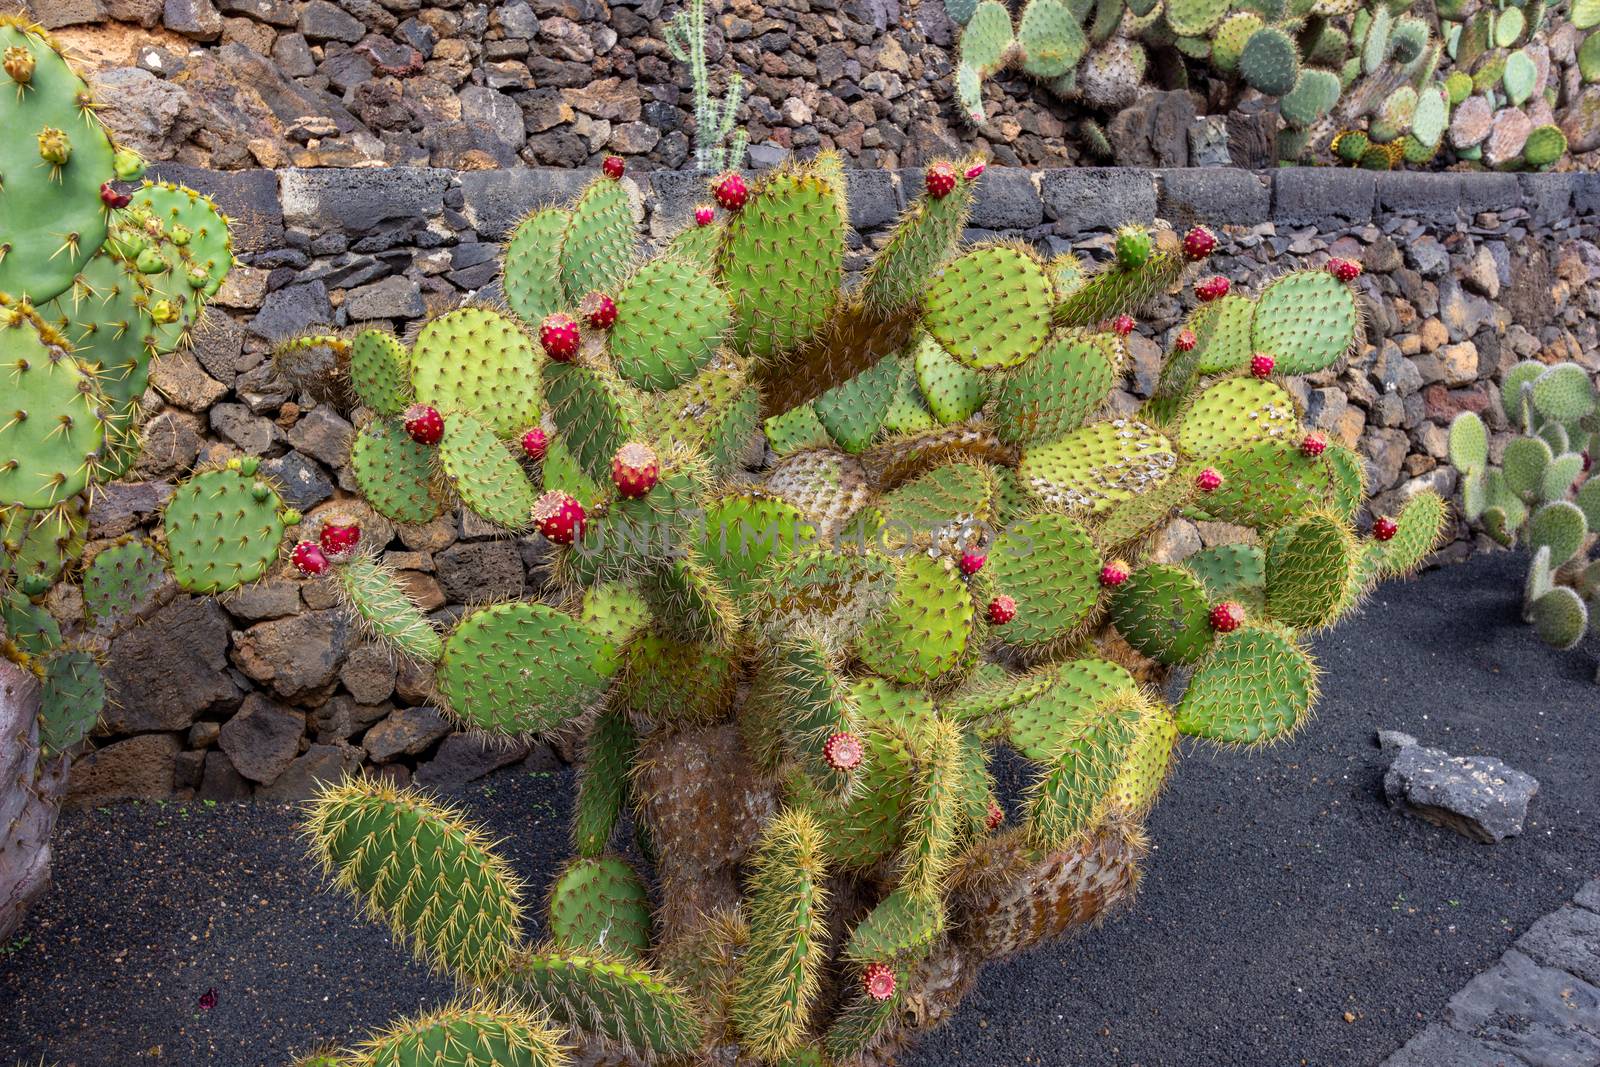 Prickly pear cactus (opuntia) with red fruits in Jardin de Cactus by Cesar Manrique on canary island Lanzarote, Spain